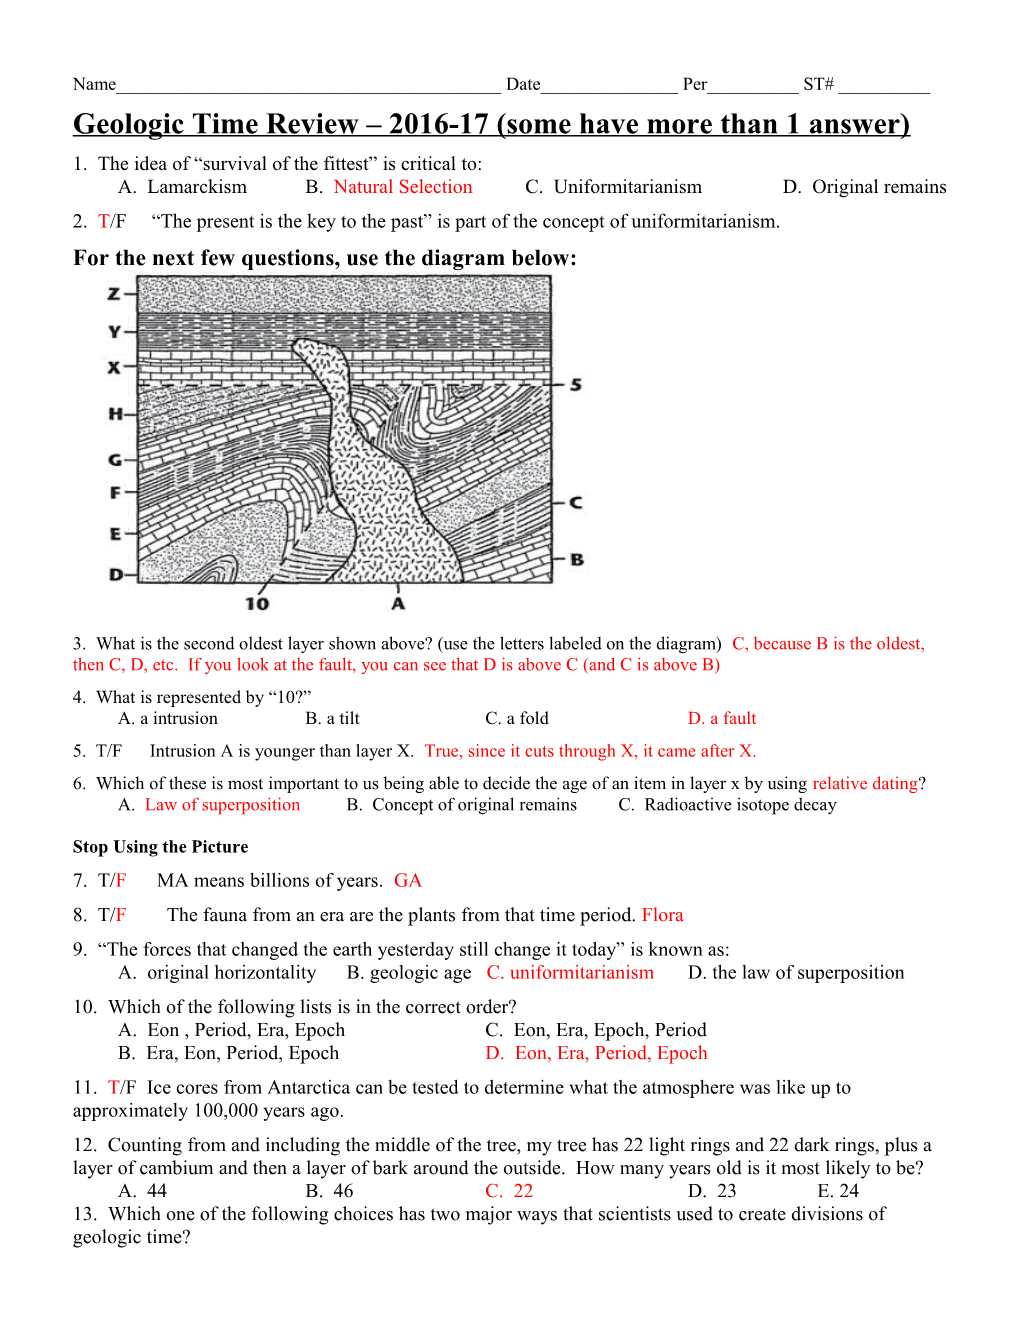 Geologic Time Review 2016-17 (Some Have More Than 1 Answer)